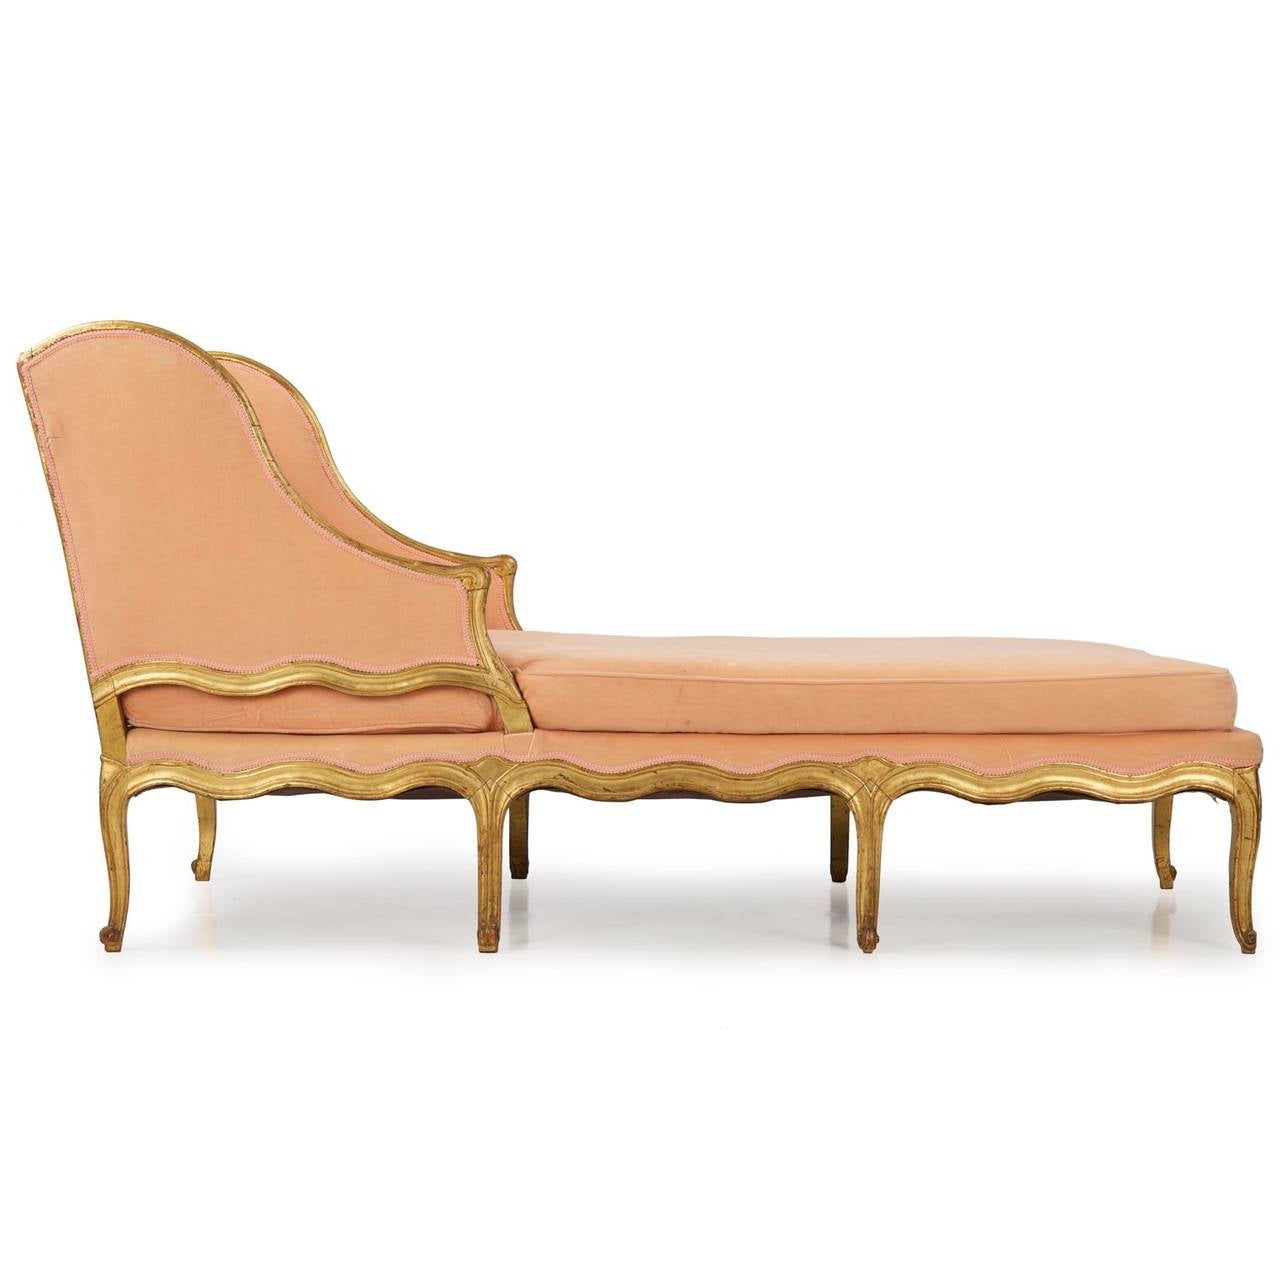 antique chaise lounge styles